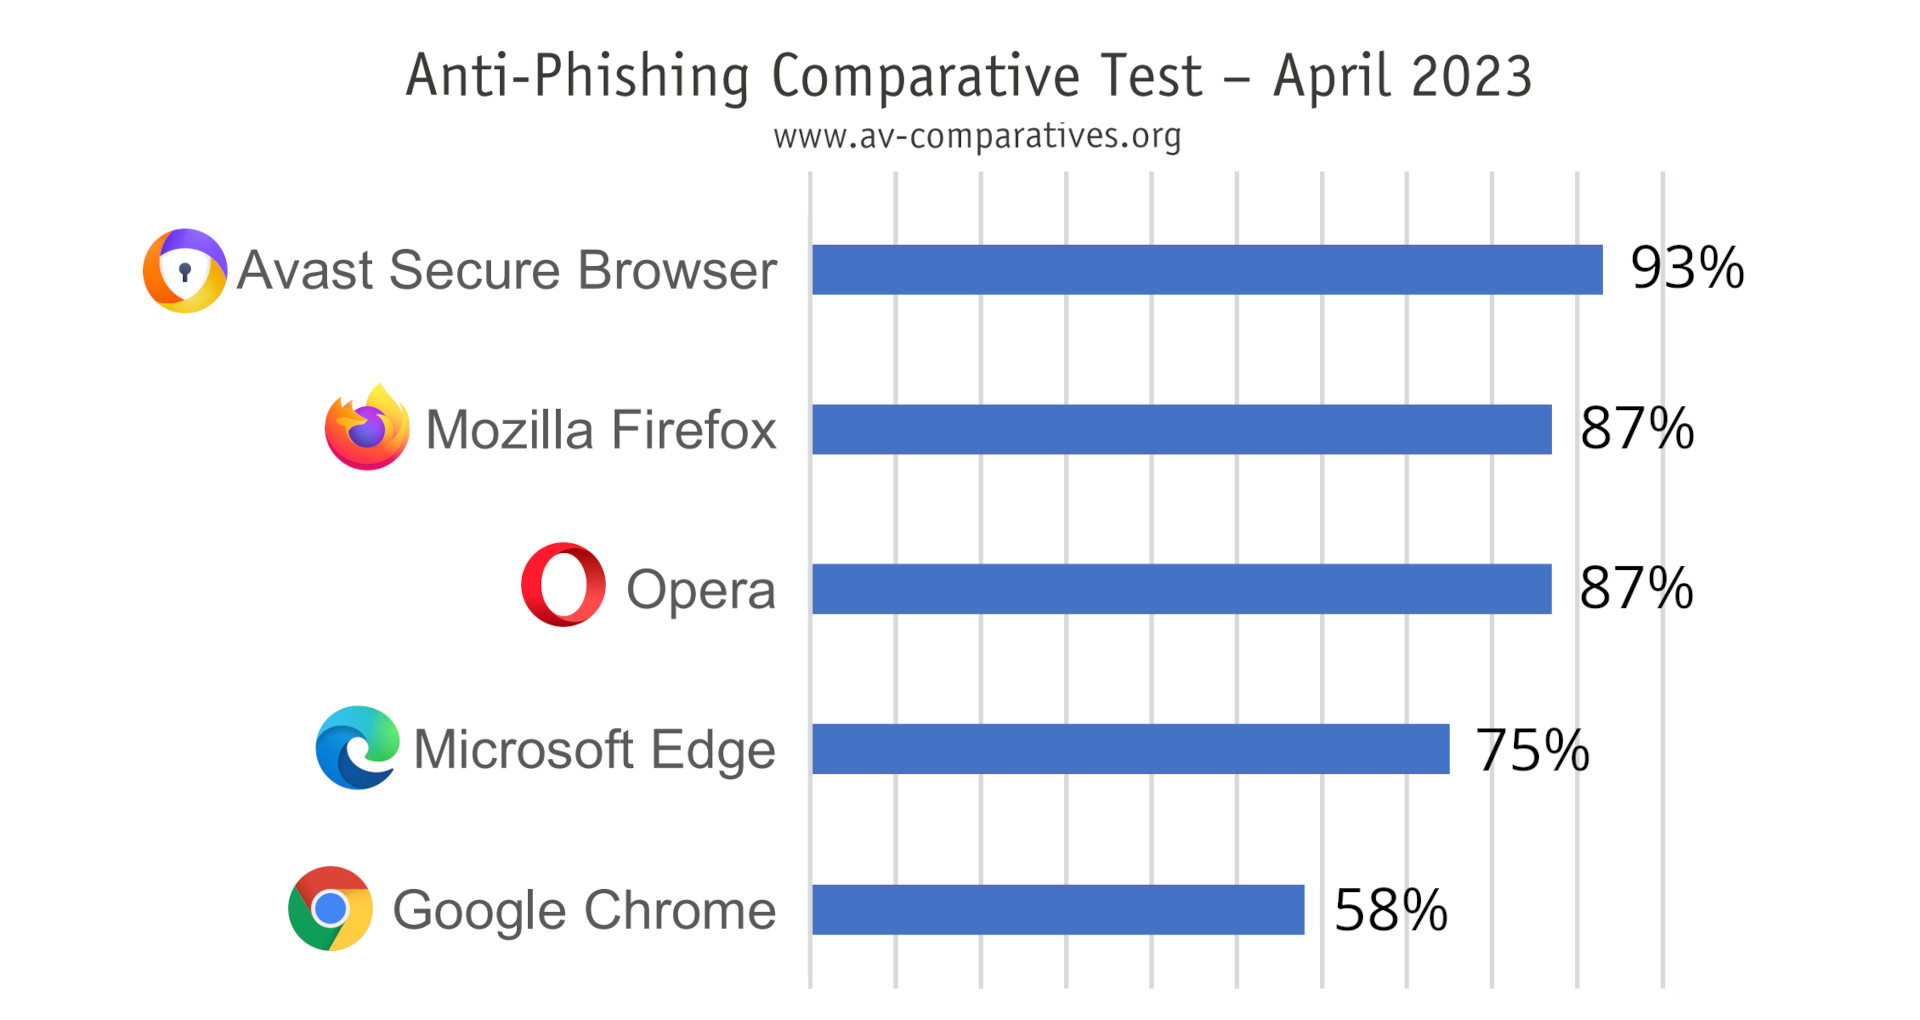 web browser anti-phishing comparative test - april 2023